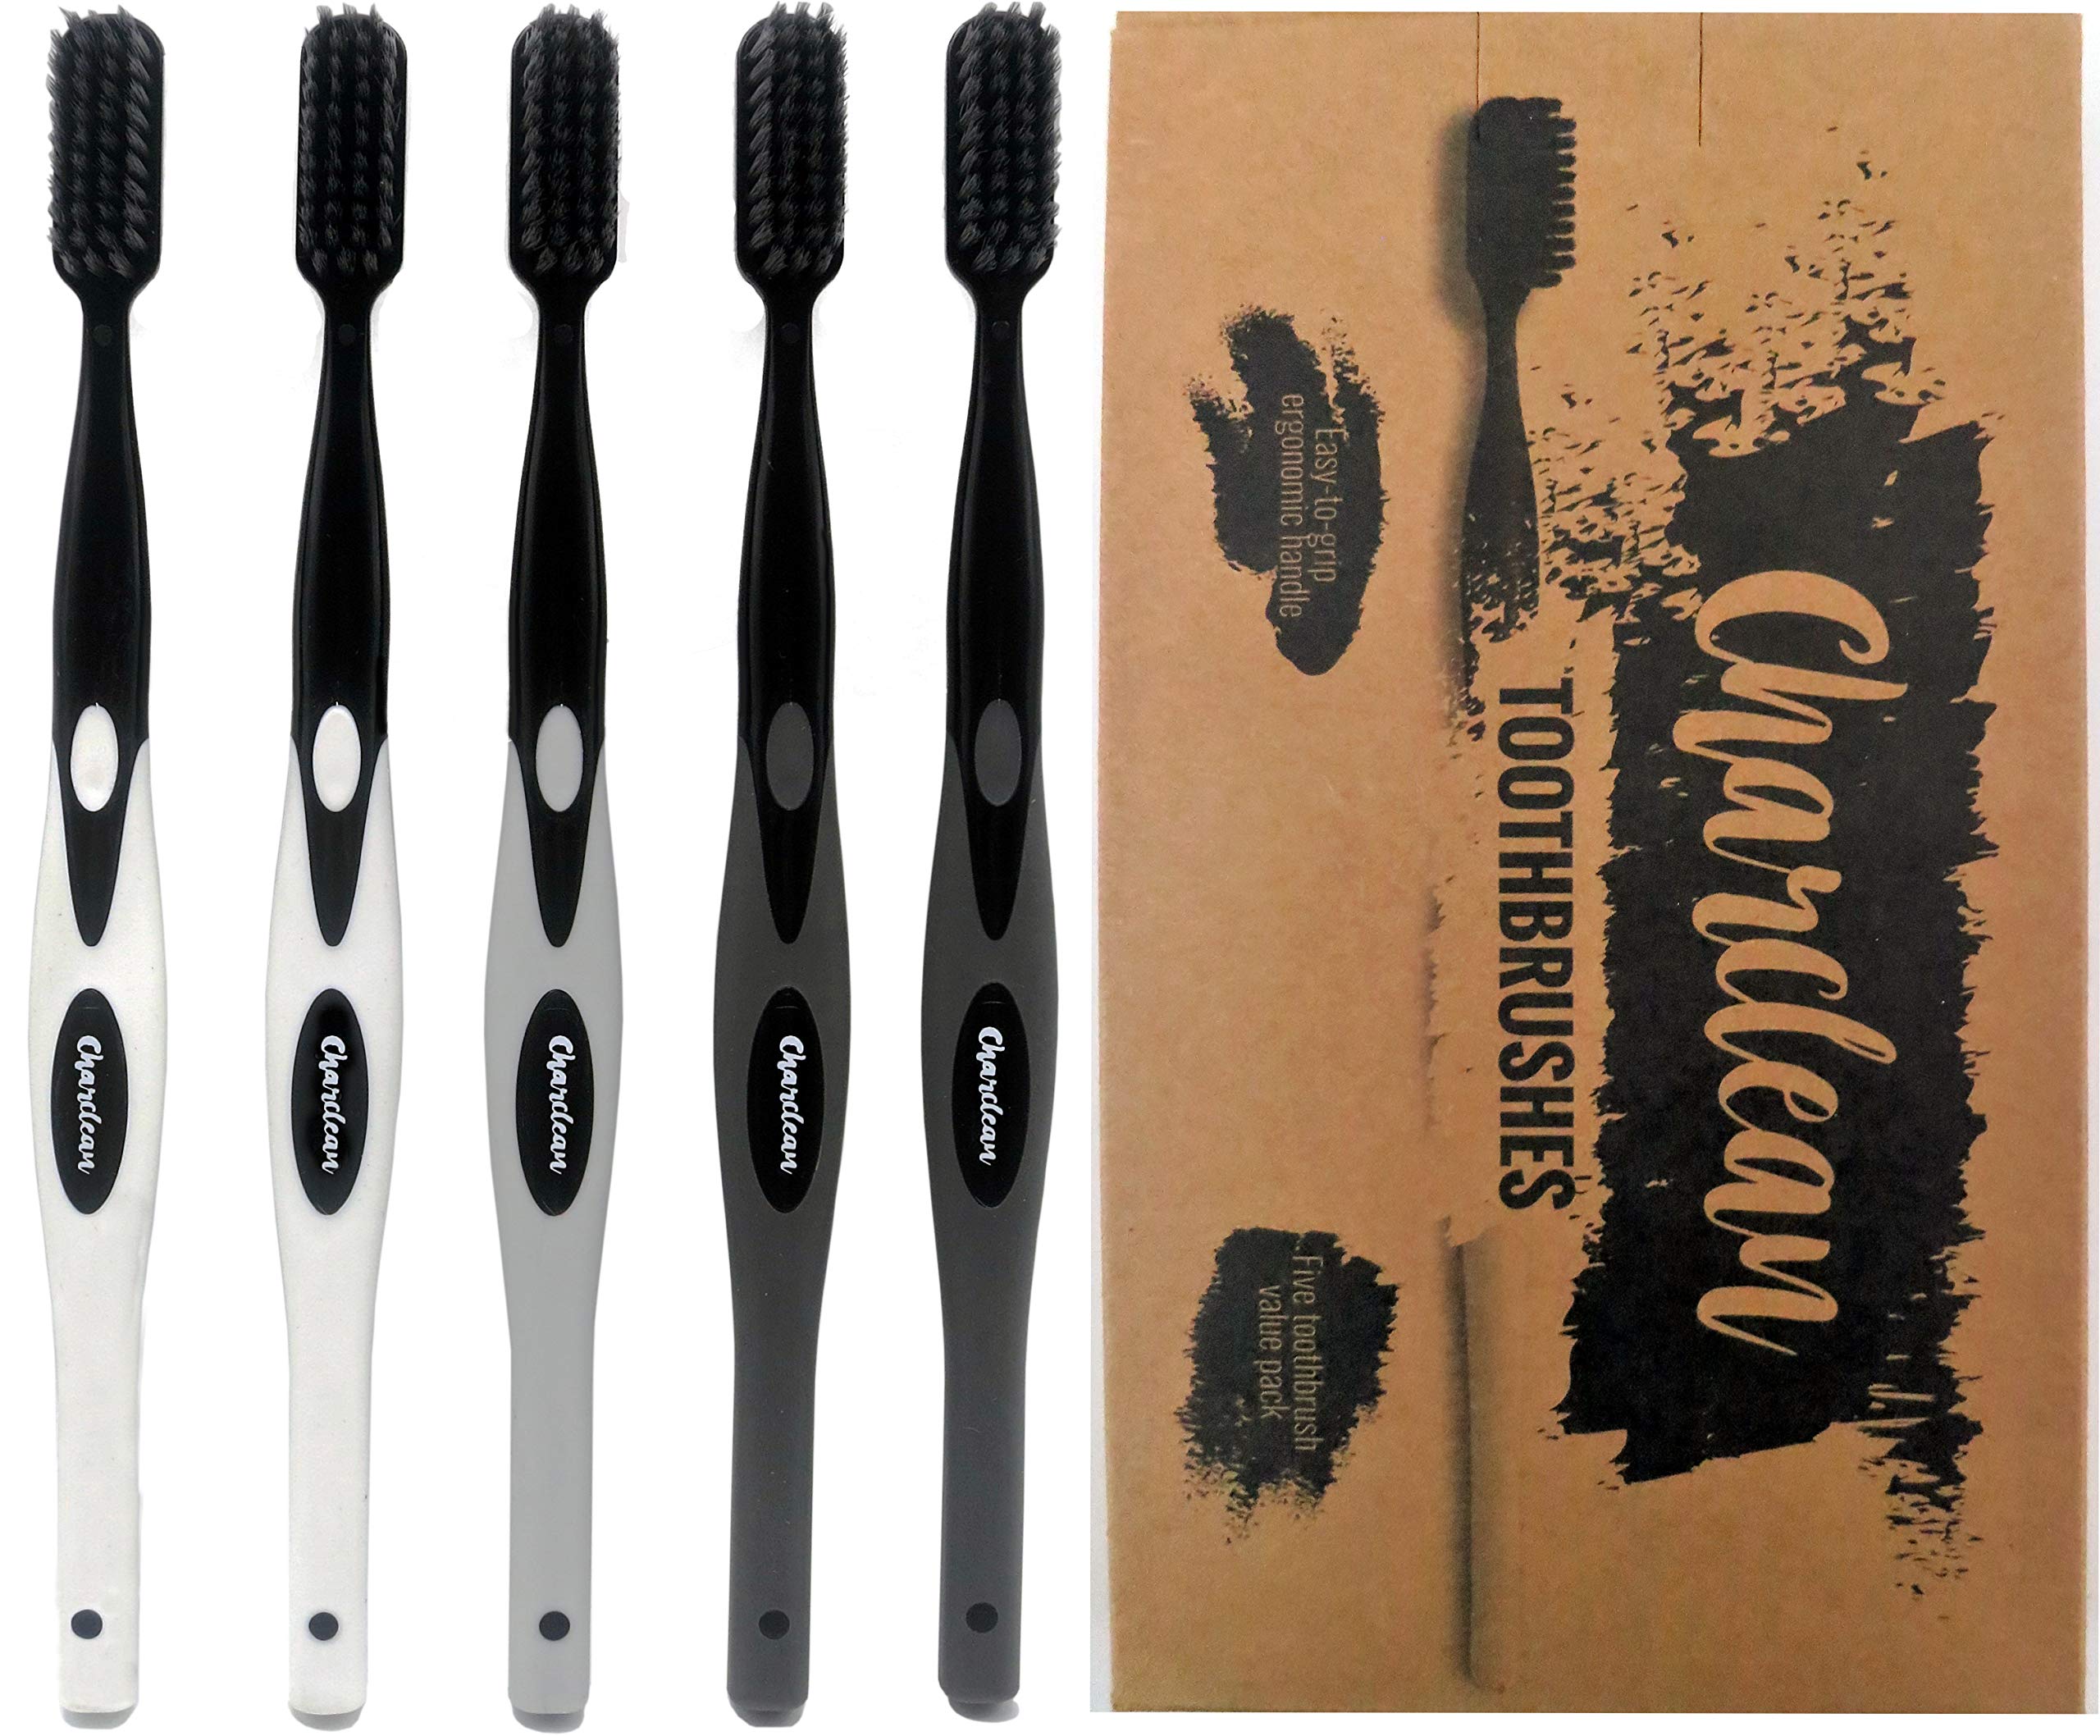 Book Cover 5 Pack Activated Charcoal Infused Toothbrush Ultra Soft Bristles - Naturally Whitening - Ergonomic Soft Touch Handle (Grey)